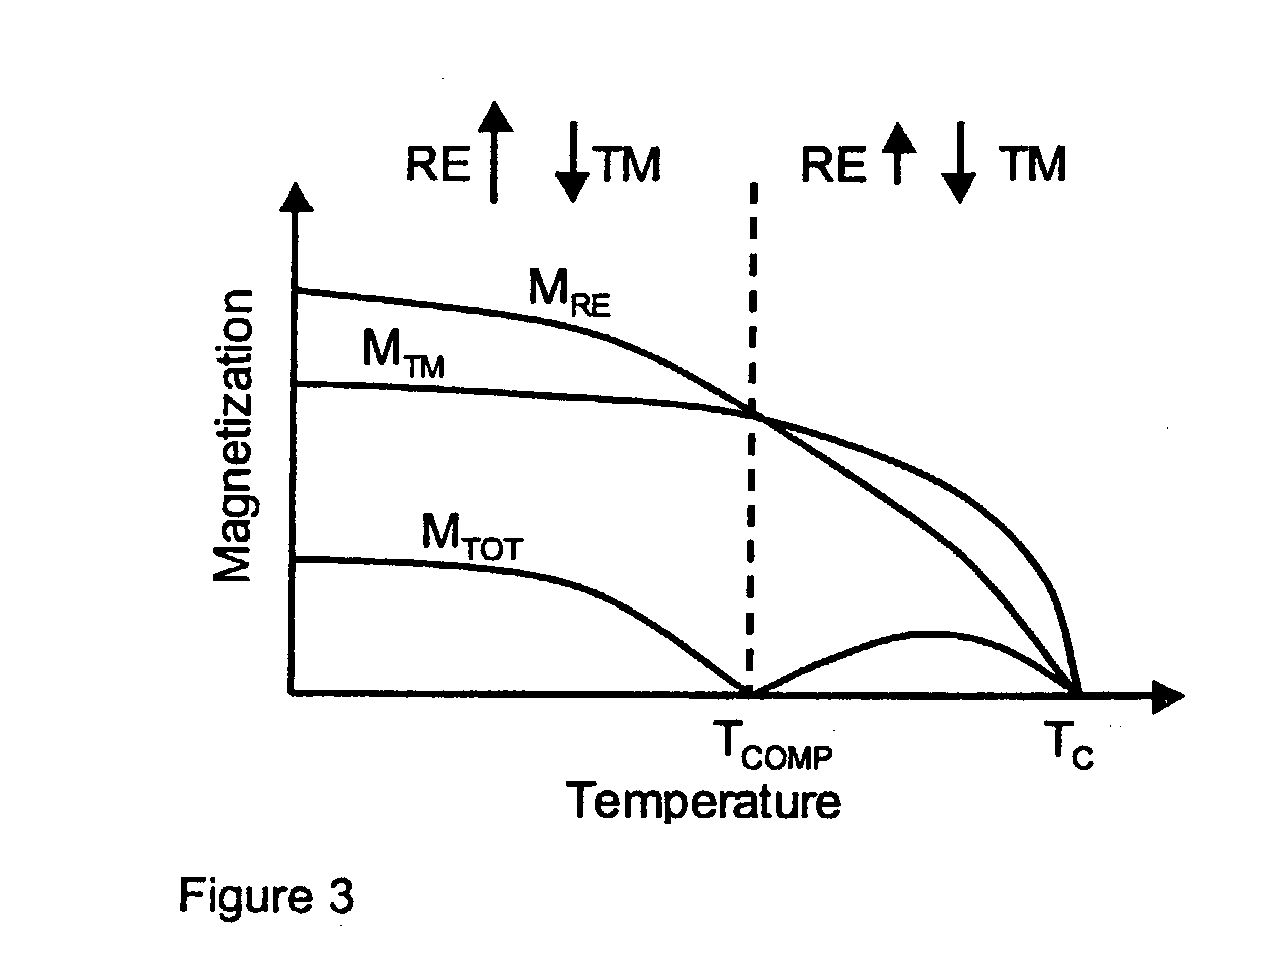 Thermally-assisted magnetic writing using an oxide layer and current-induced heating